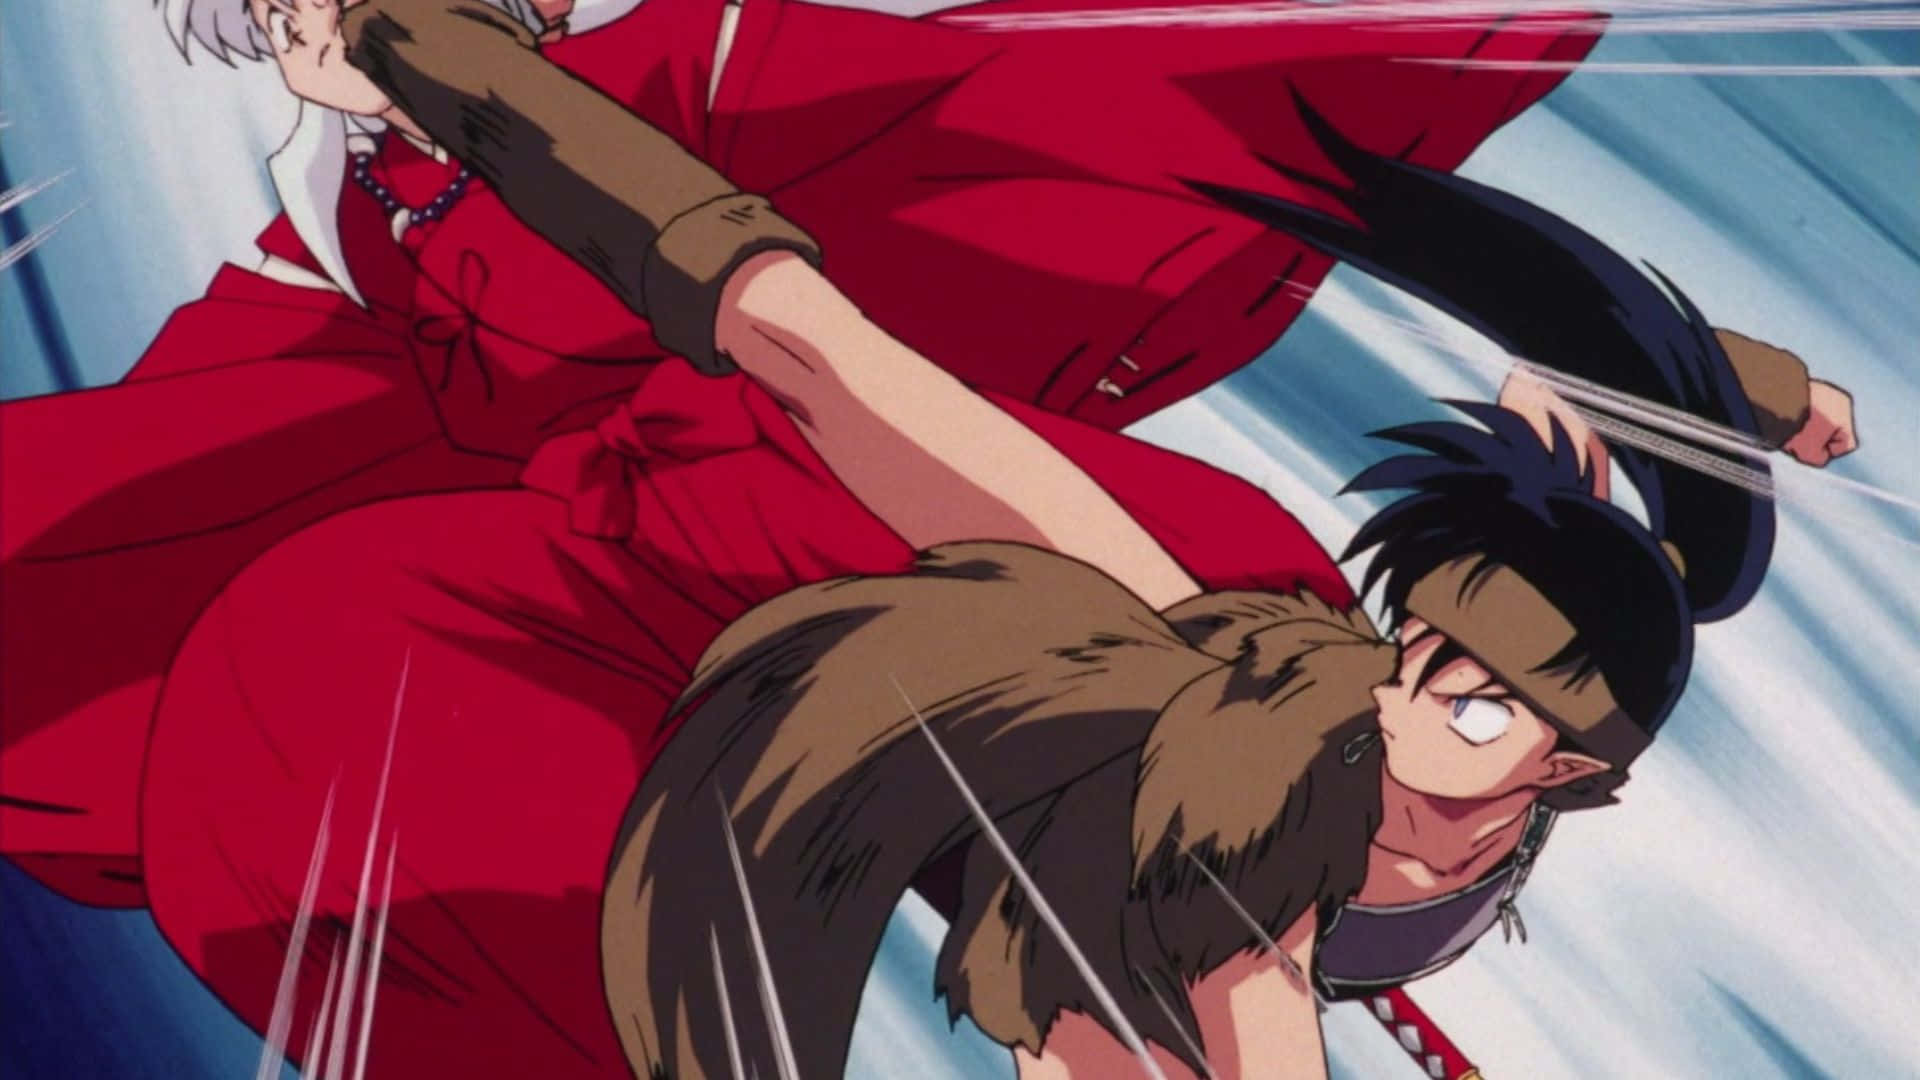 Inuyasha and Koga face off in a tense moment Wallpaper